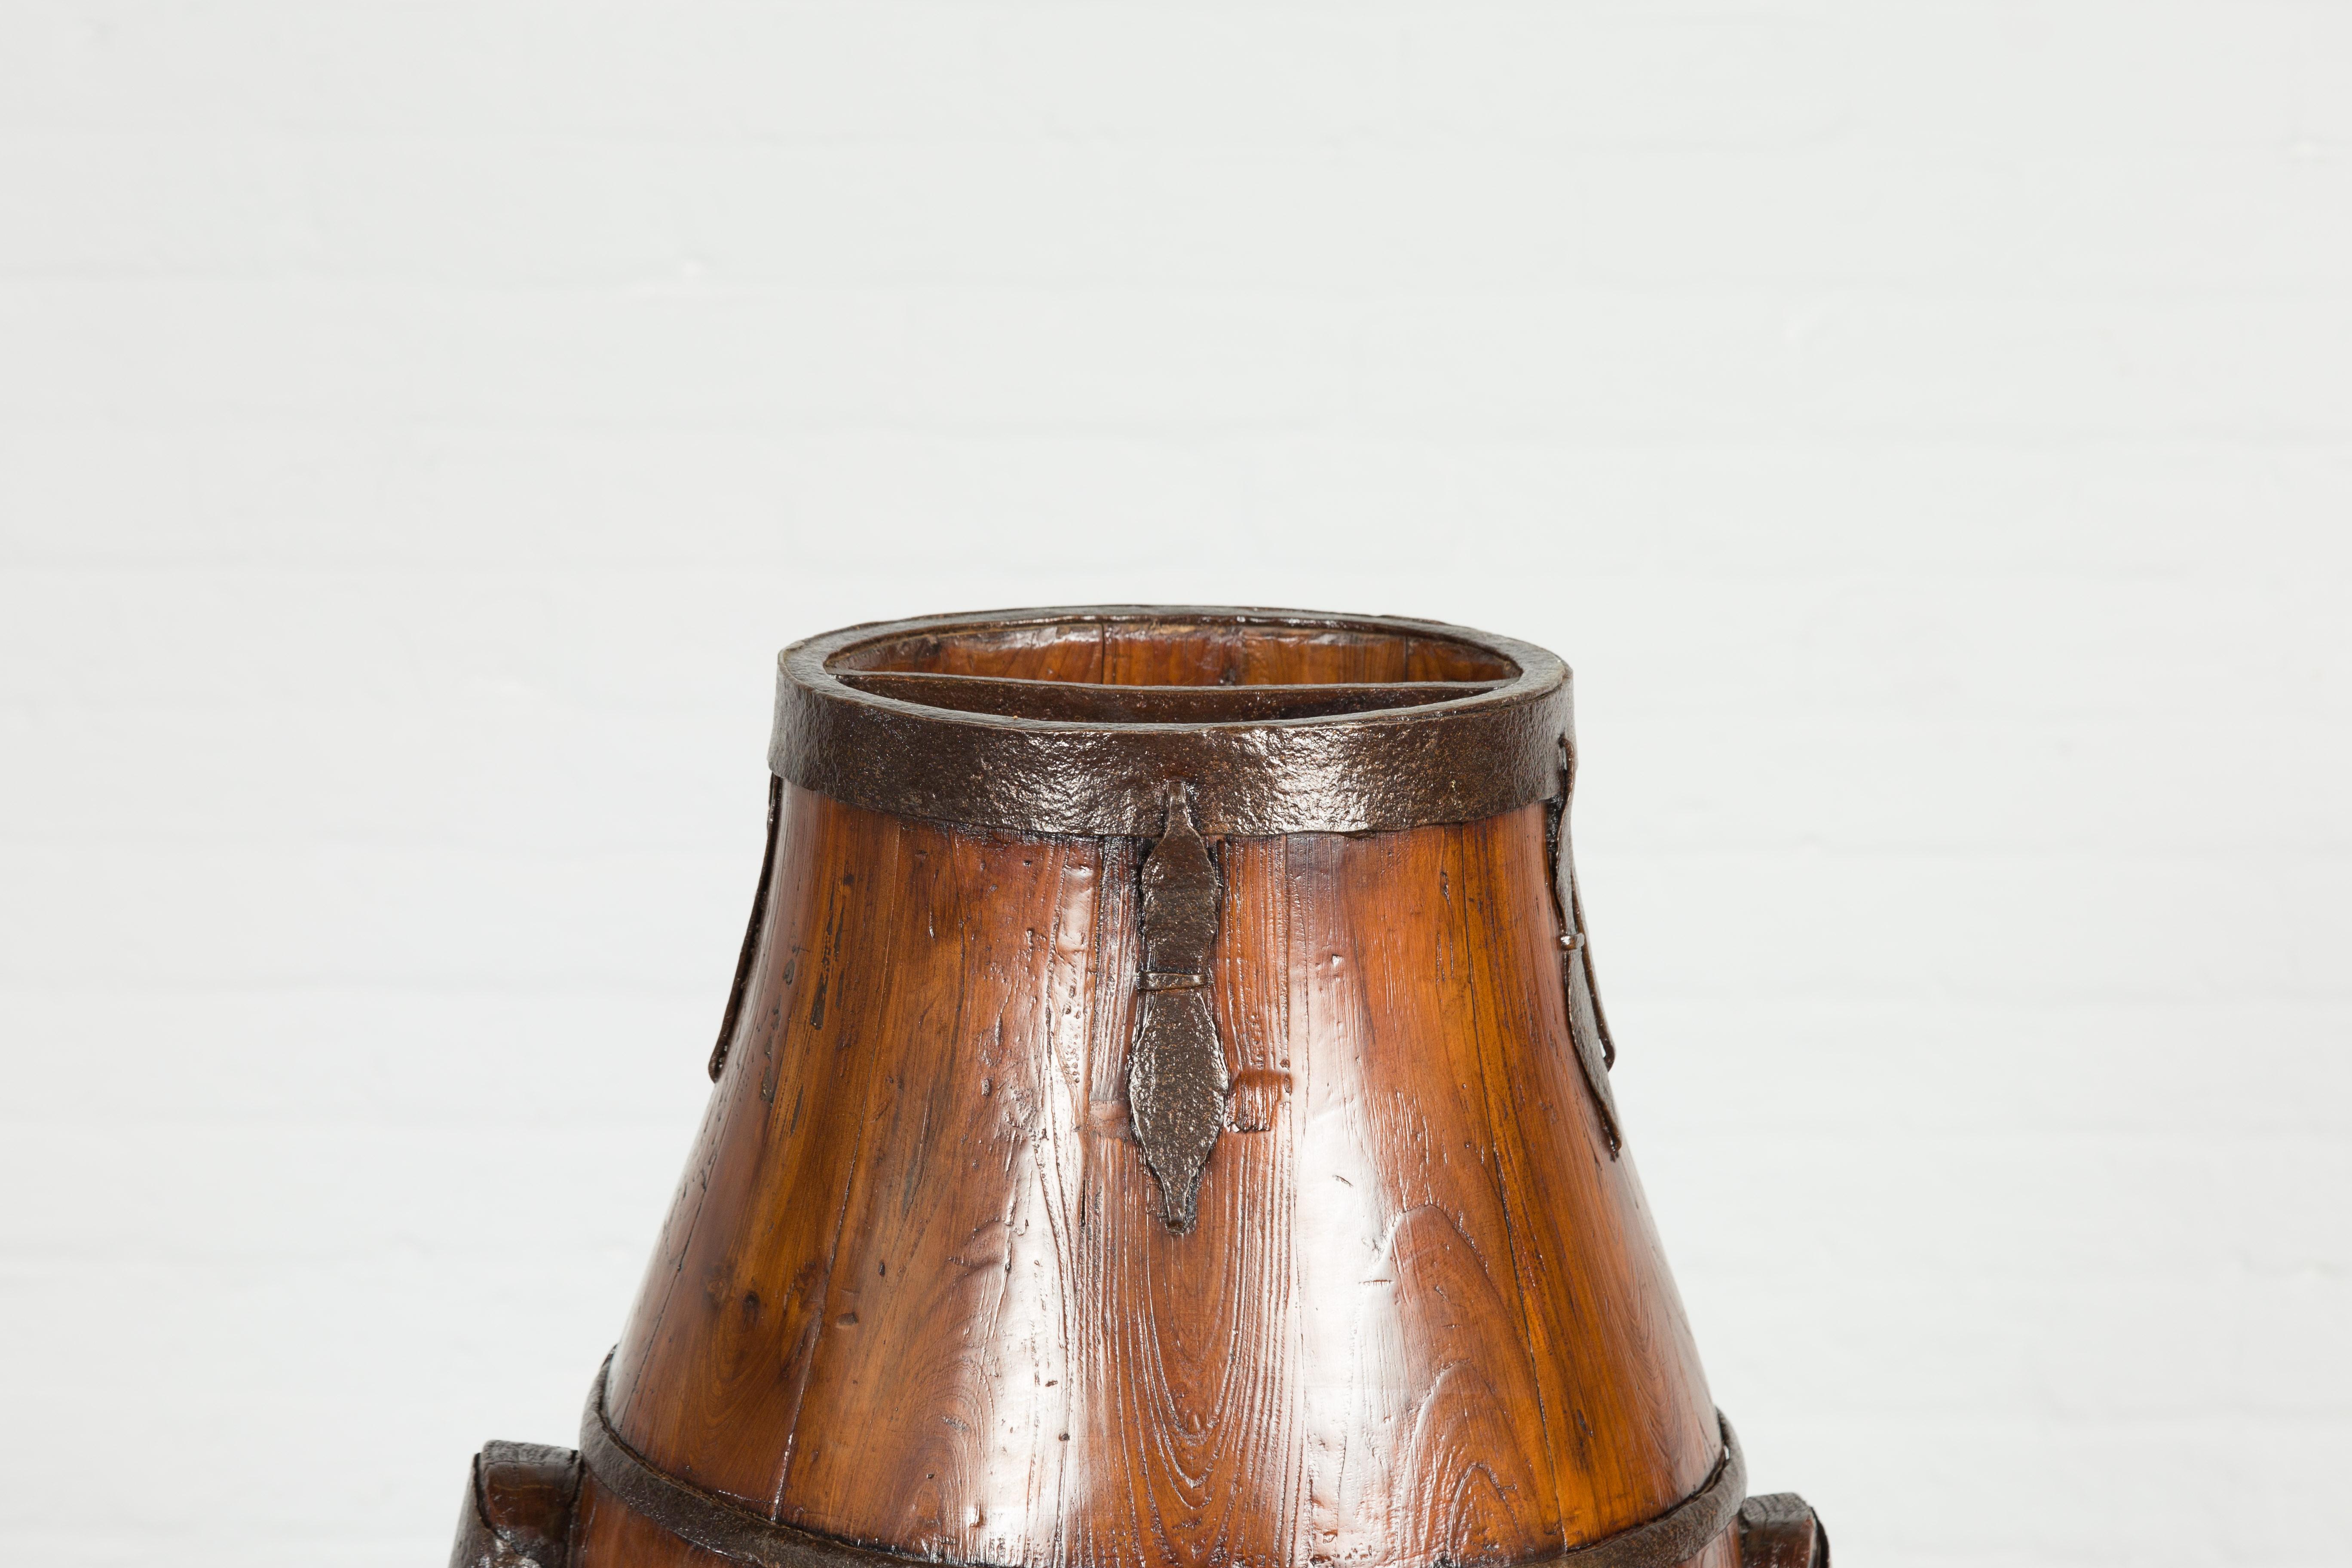 Varnished Chinese Qing Dynasty Period 19th Century Pear-Shaped Wooden Grain Basket For Sale